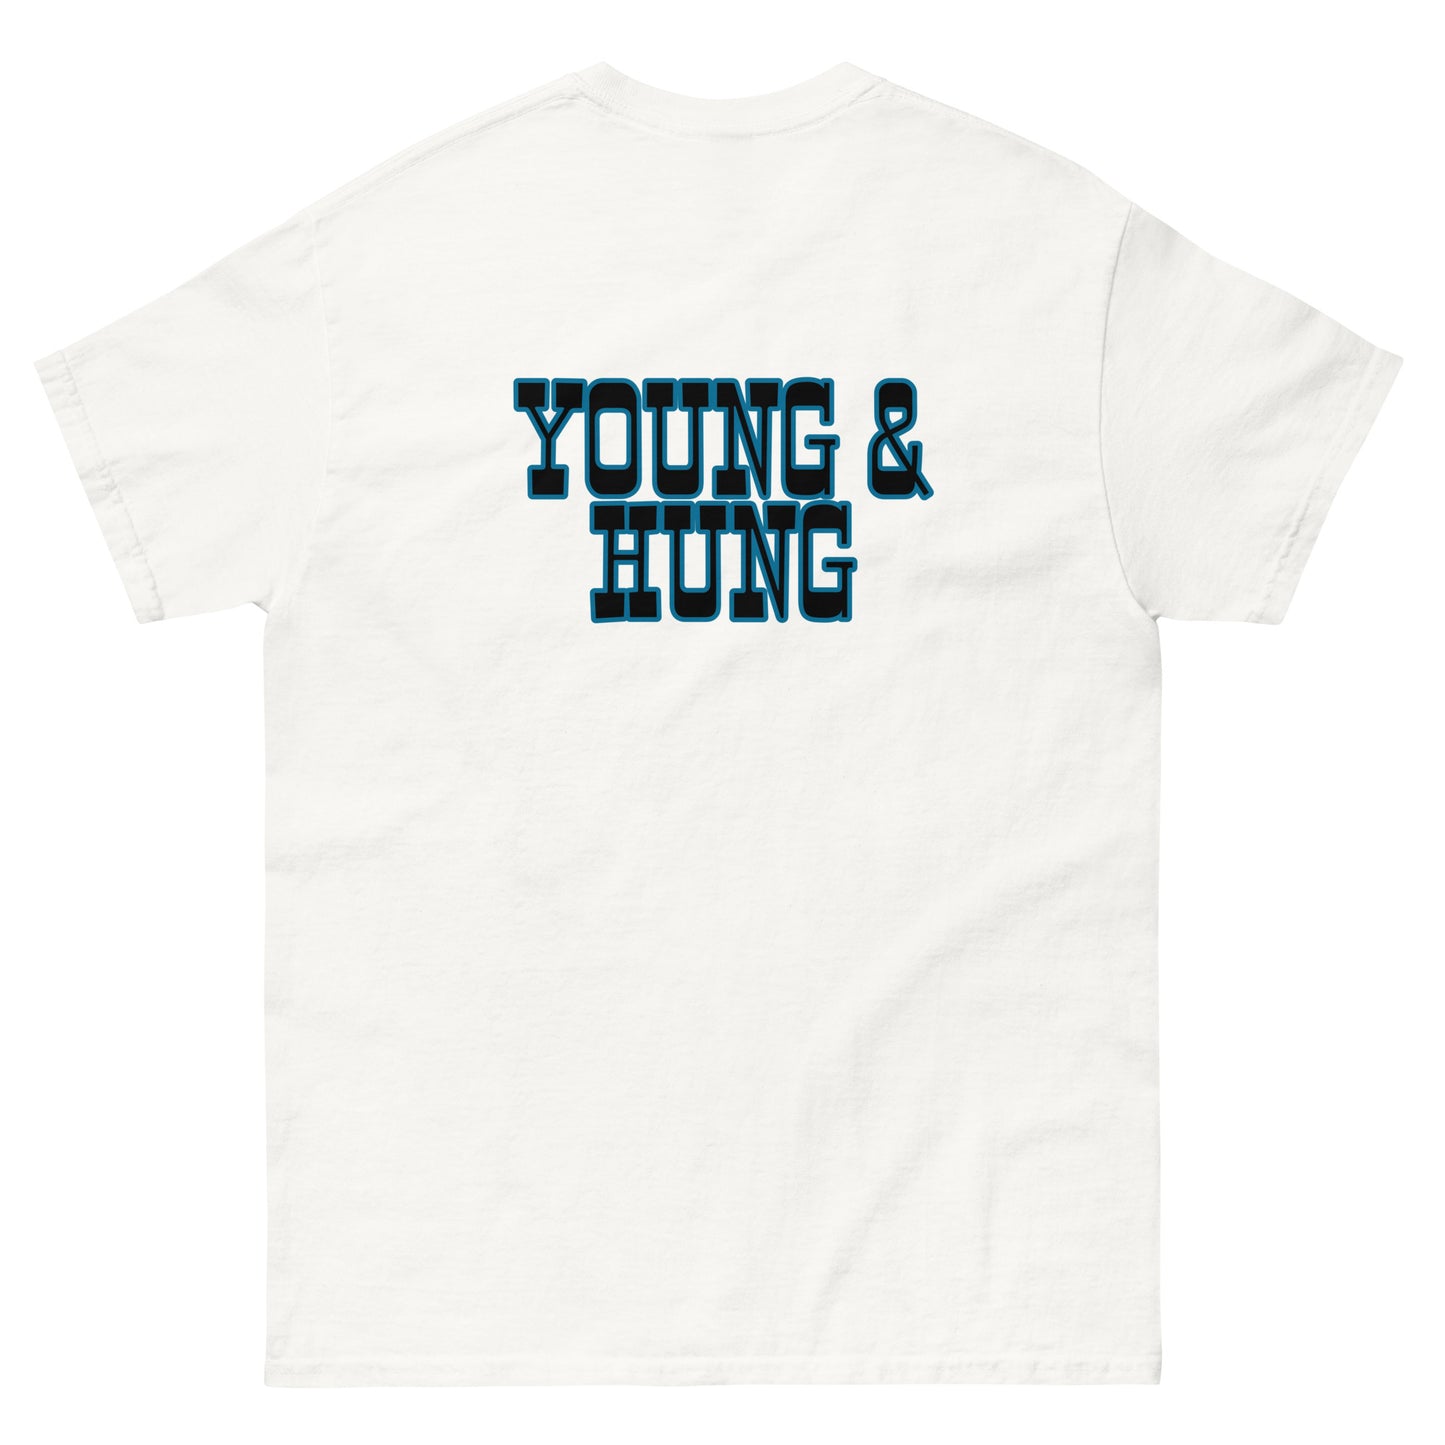 YOUNG & HUNG VOYOU T